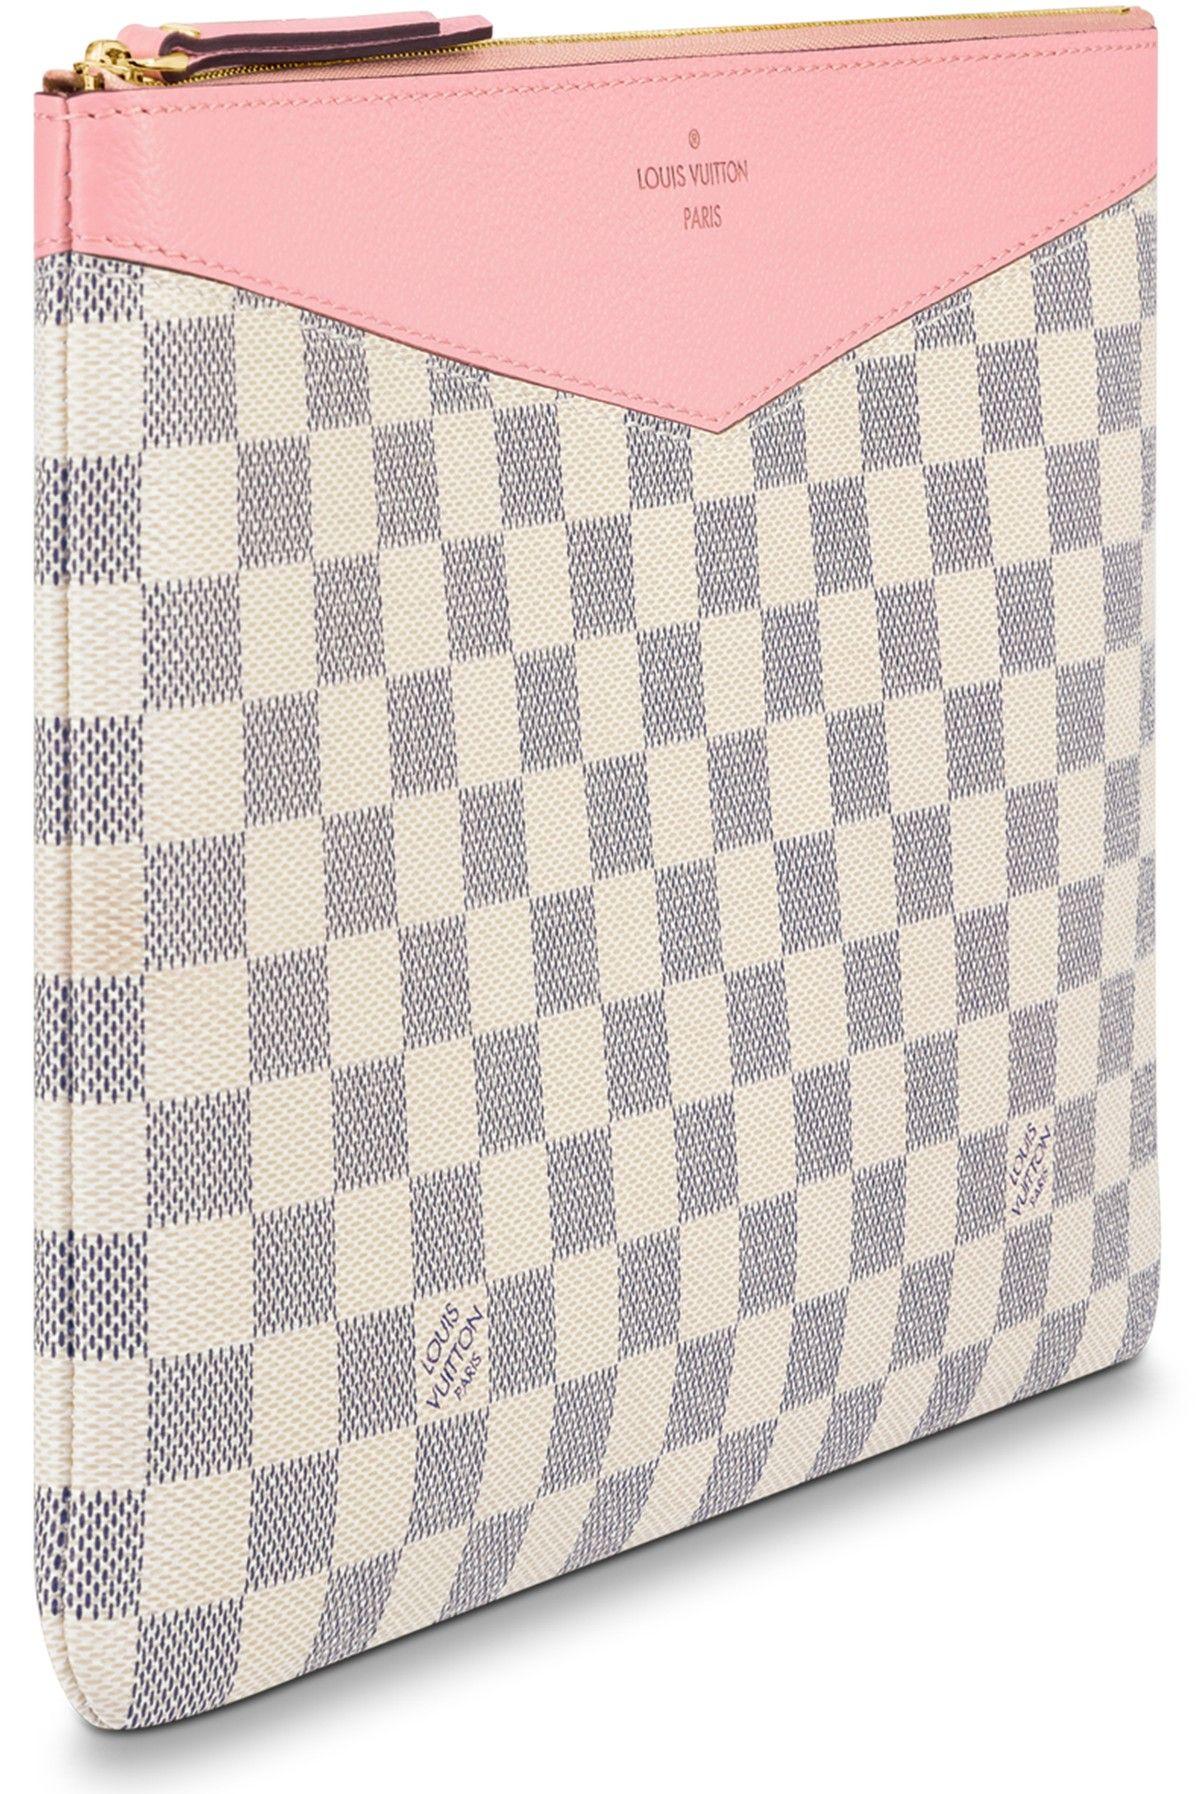 Louis Vuitton Daily Pouch in Pink